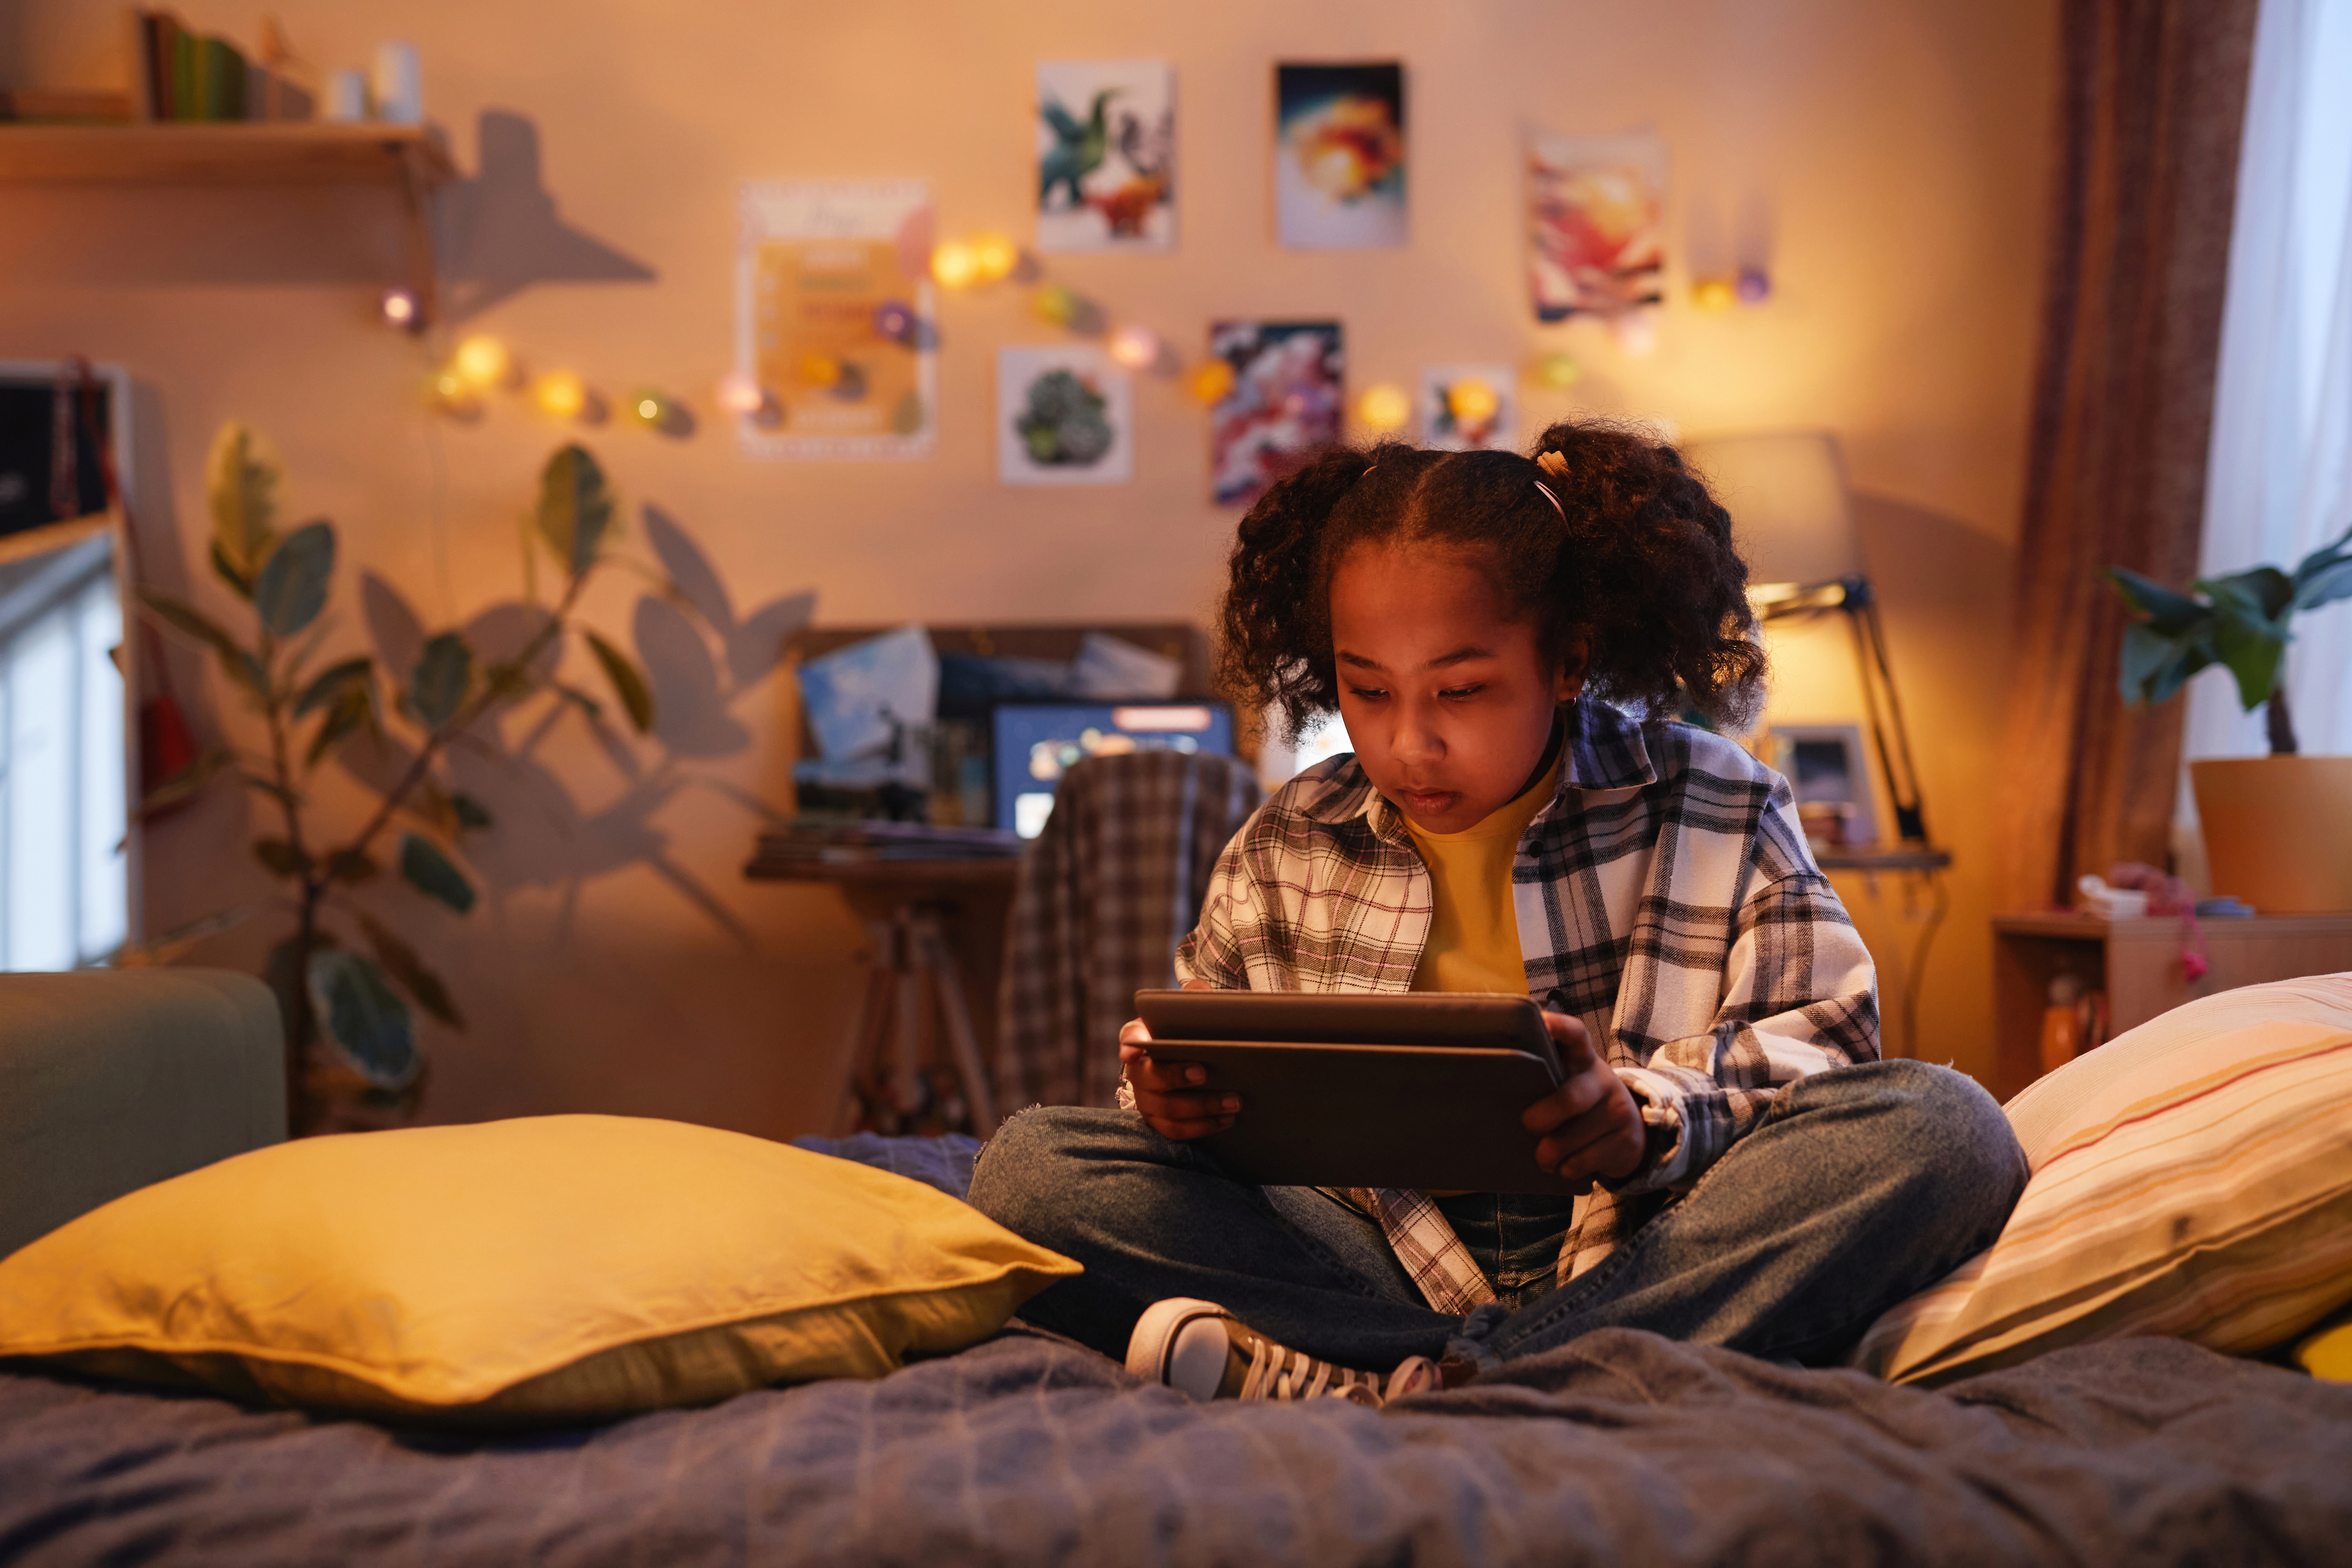 Child sitting on bed engaged with a tablet, surrounded by pillows, with artwork on the wall